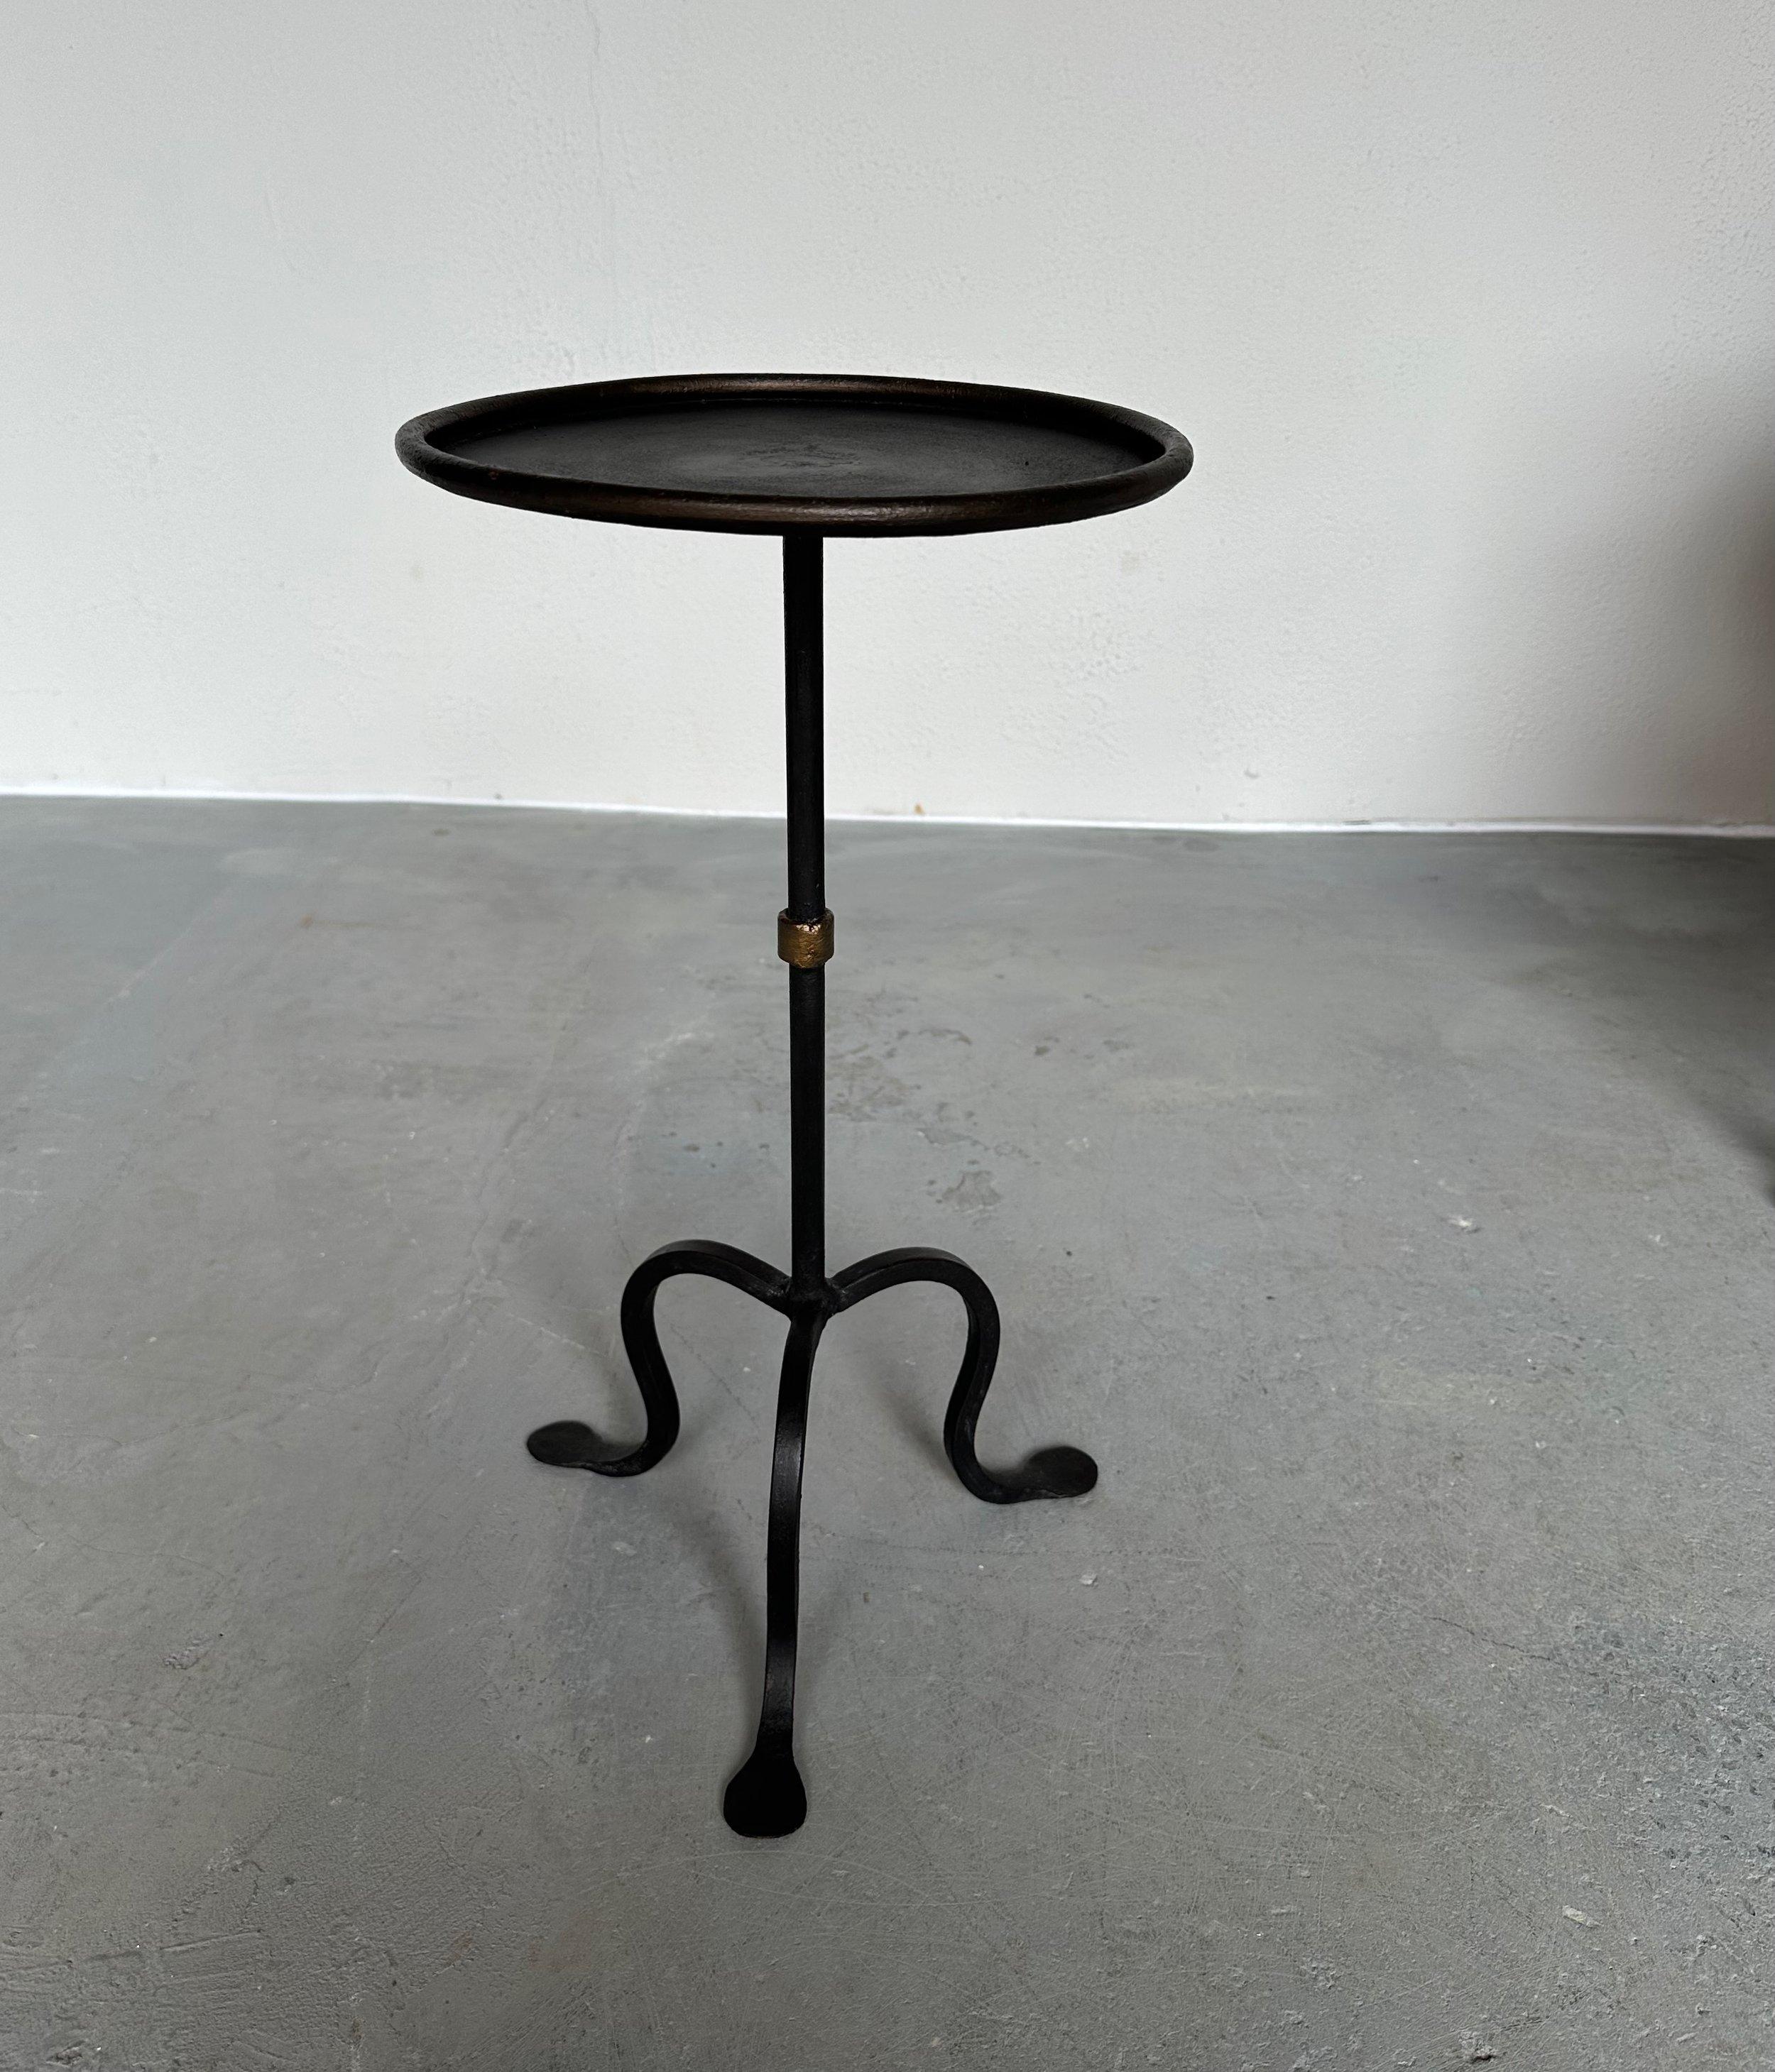 Based on one of our favorite vintage designs, this lovely Spanish iron drinks table was recently crafted to our specifications and features a hand-applied black finish with subtle gold accents around the circular rim and ring detail on the stem. It